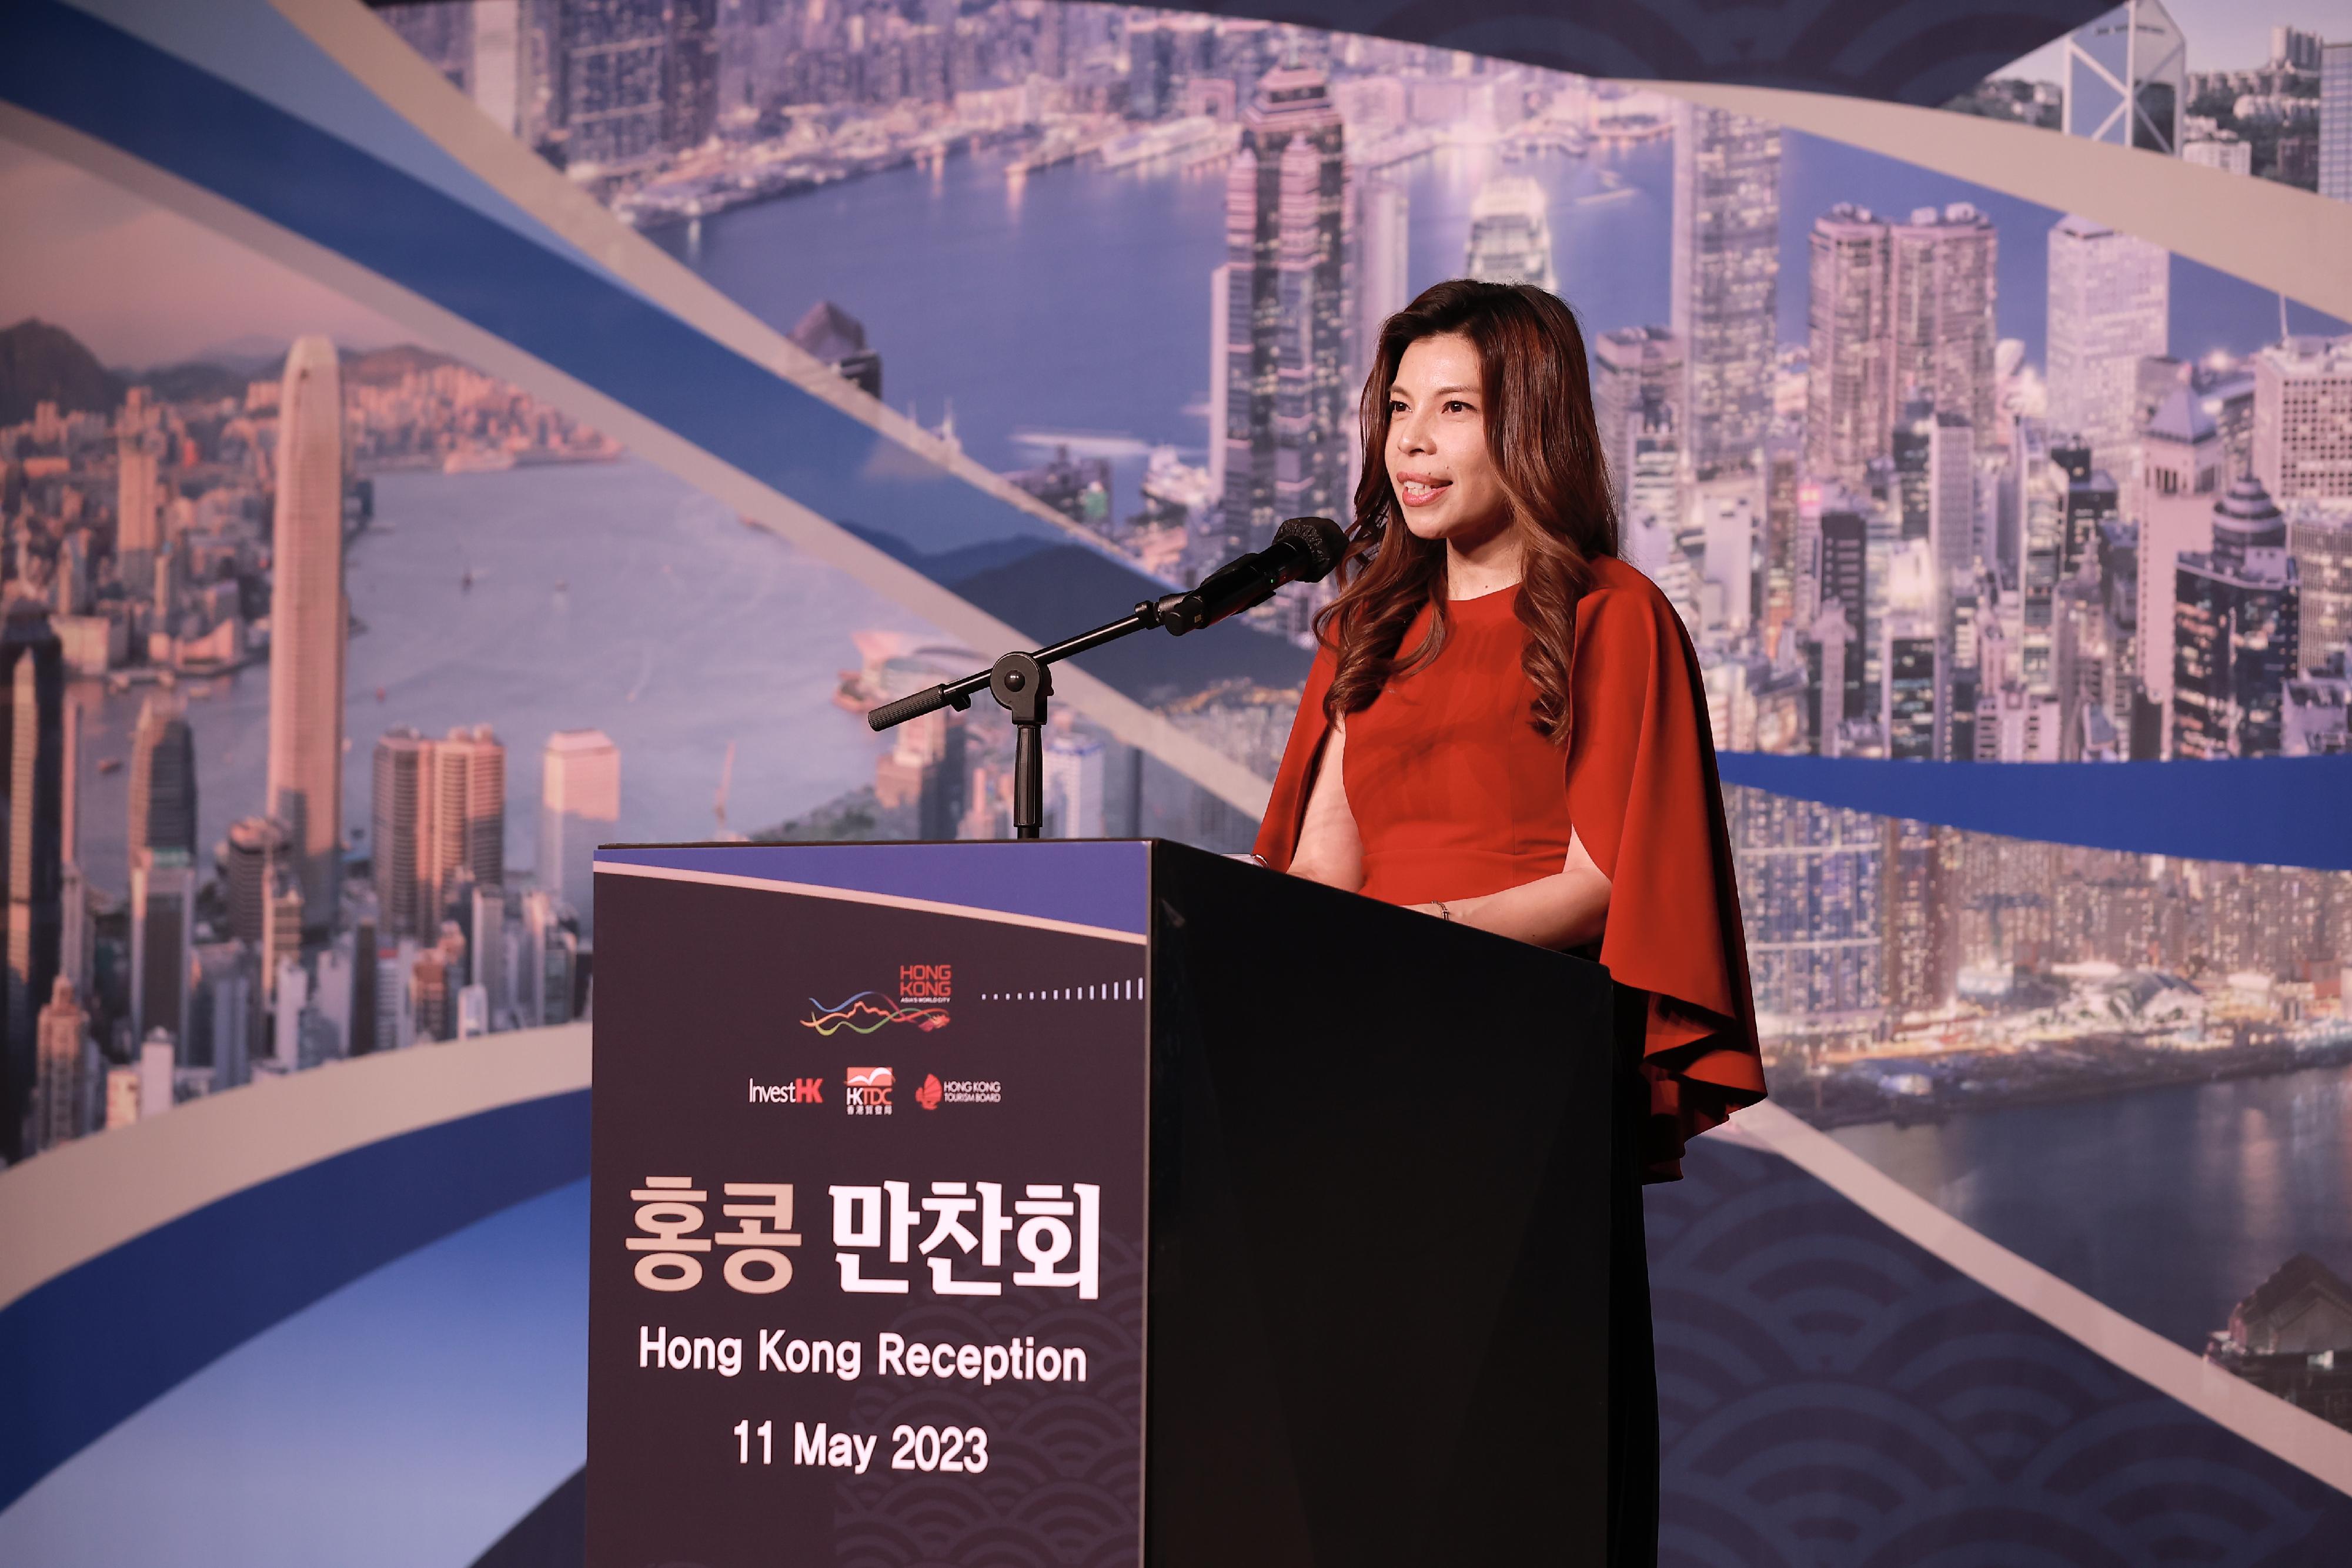 The Principal Hong Kong Economic and Trade Representative (Tokyo), Miss Winsome Au, speaks at a reception held by the Hong Kong Economic and Trade Office (Tokyo) in Seoul, Korea, today (May 11).